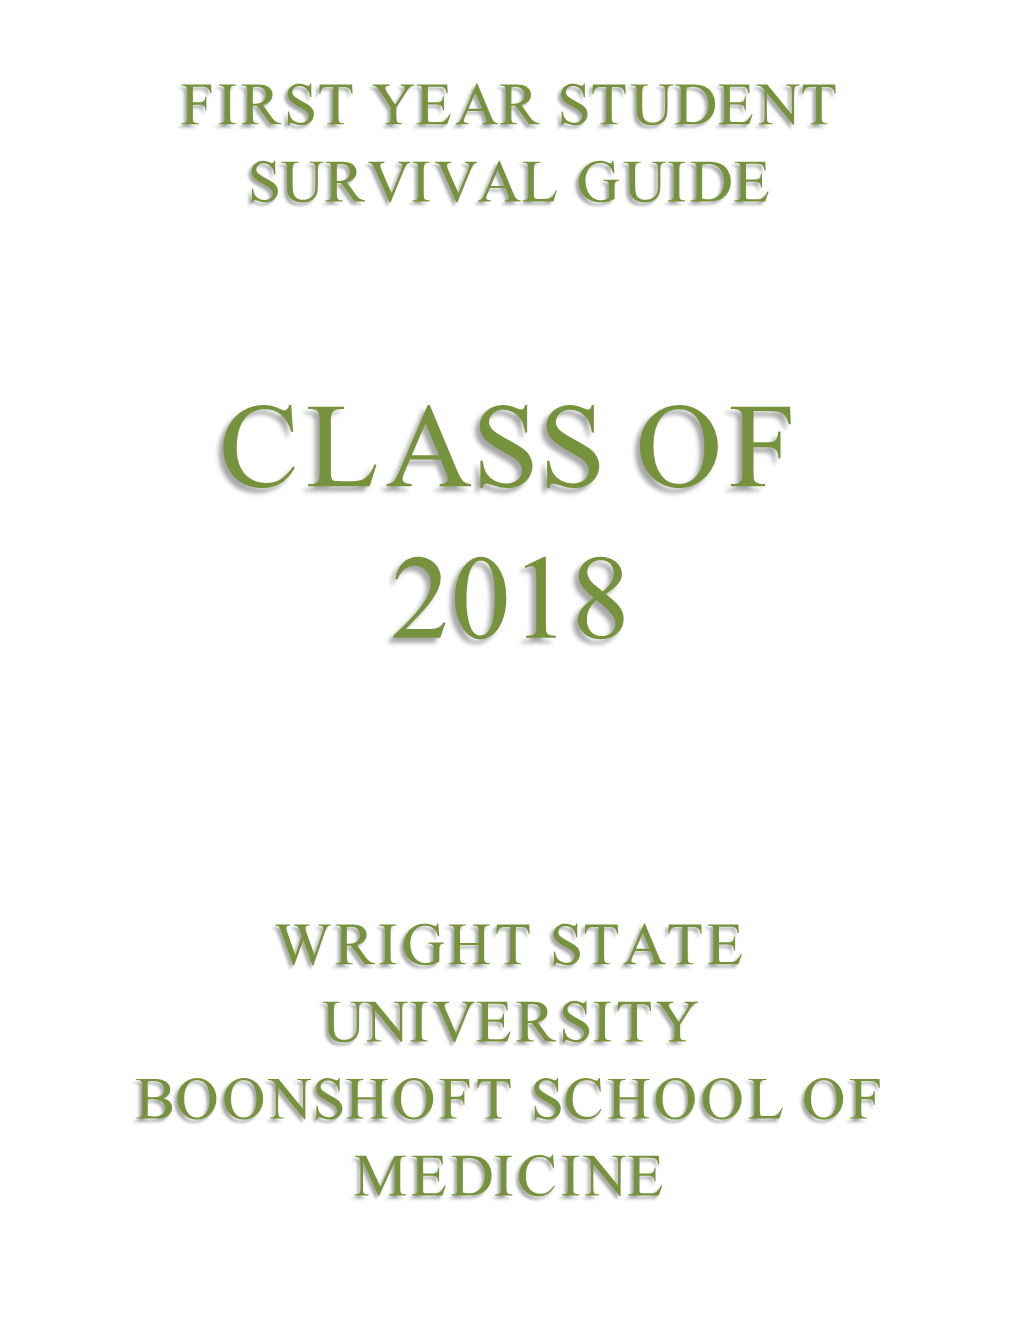 First Year Student Survival Guide Wright State University Boonshoft School of Medicine